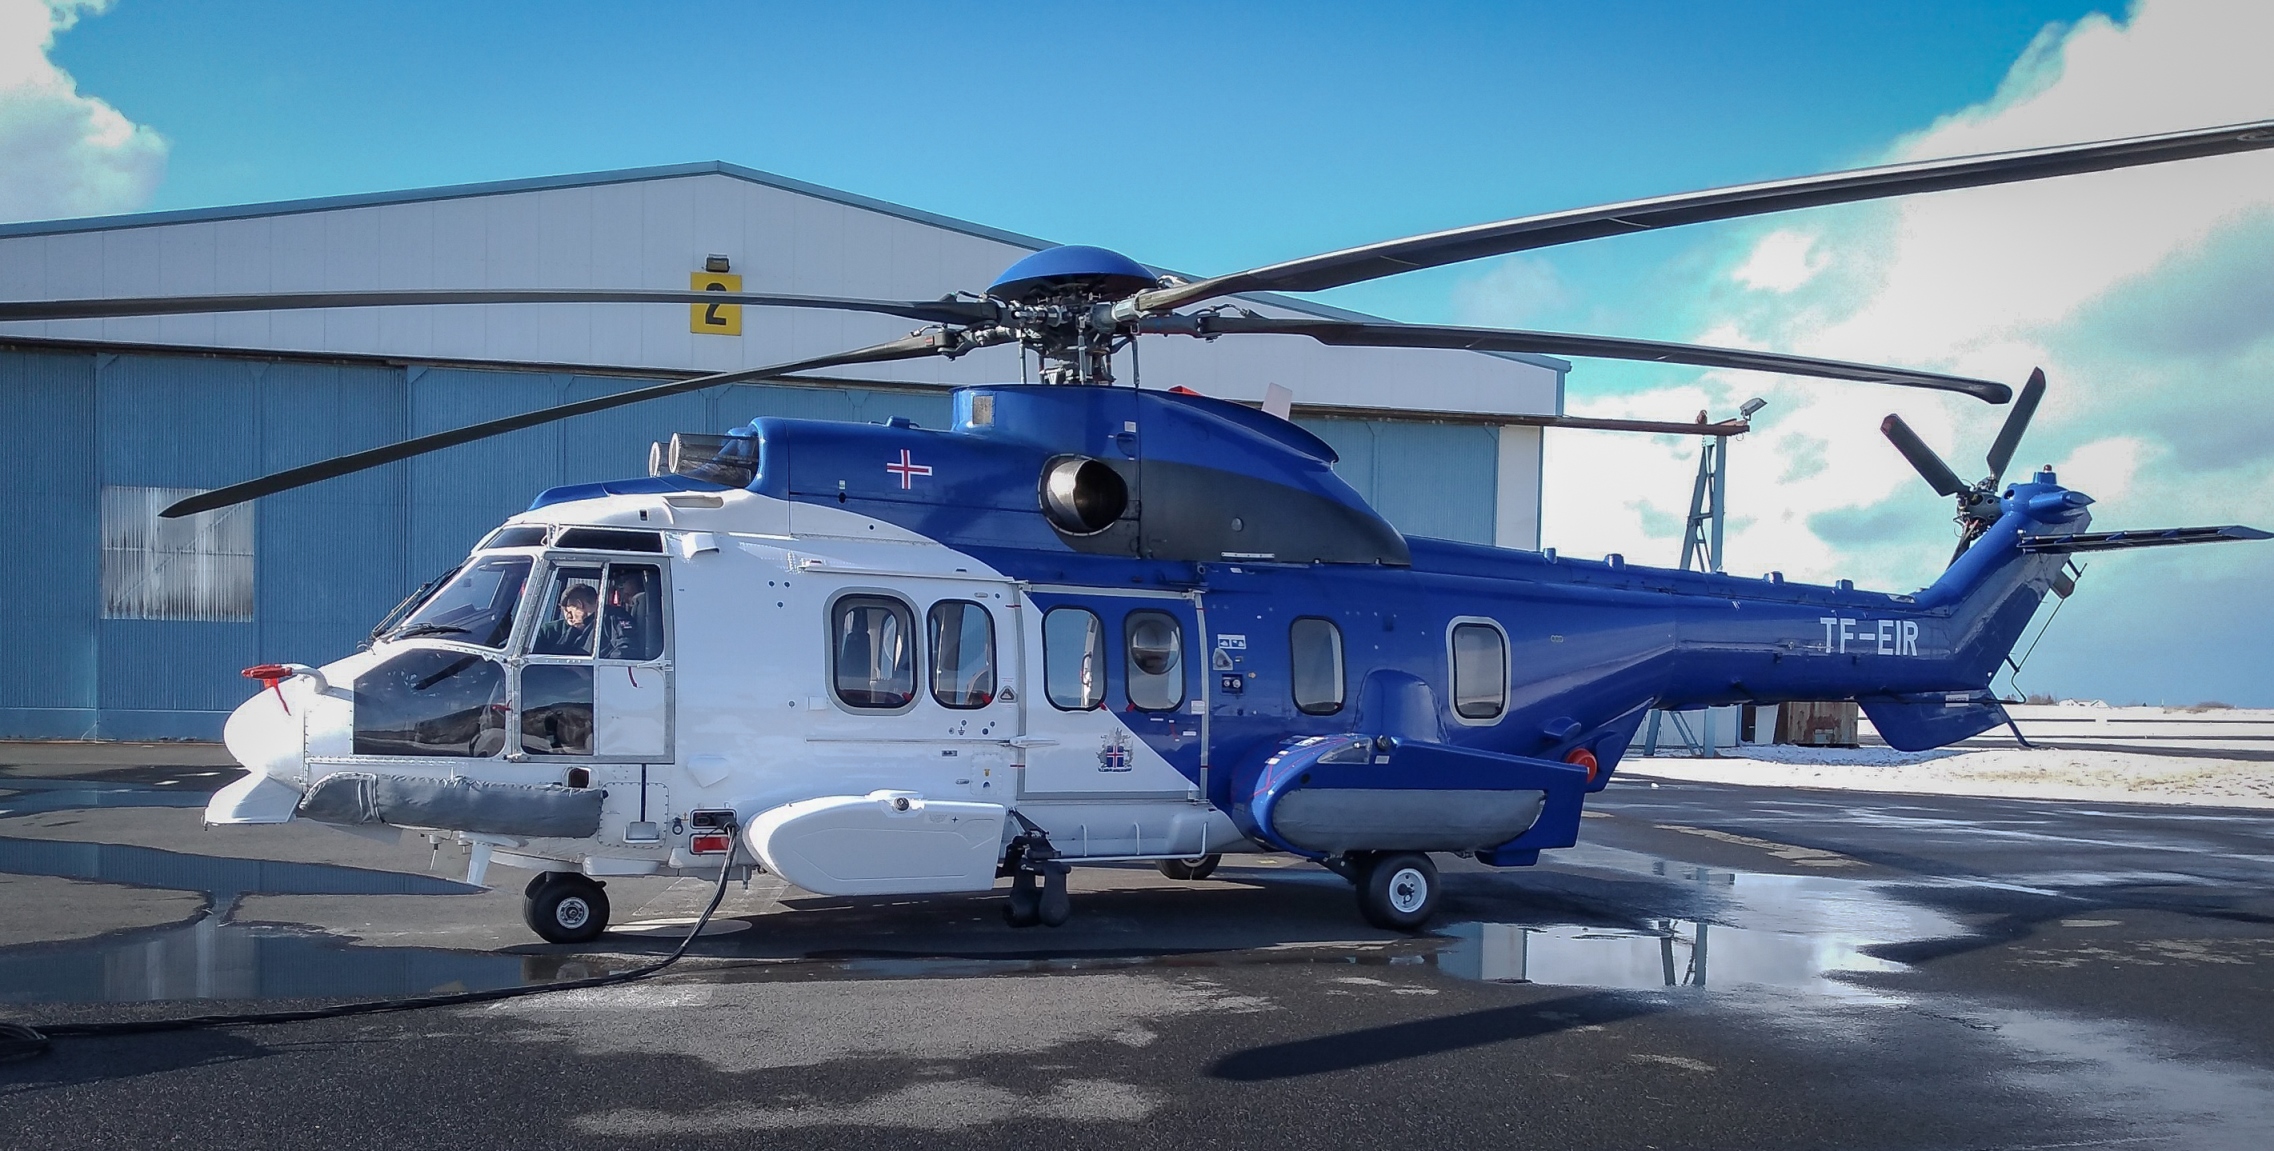 Pictured is one of the Icelandic Coast Guard’s new H225s.